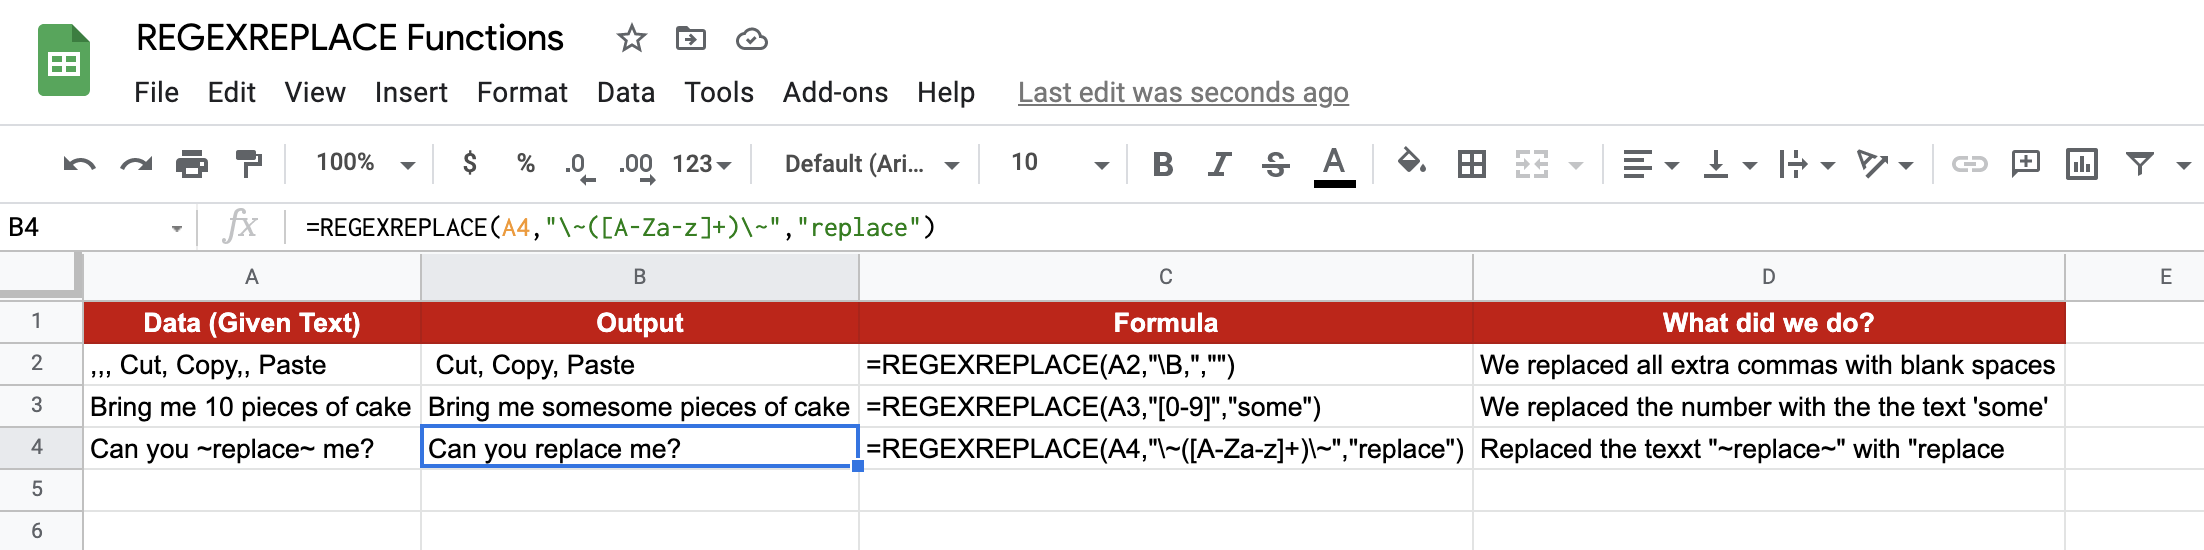 REGEXREPLACE Function in Google Sheets